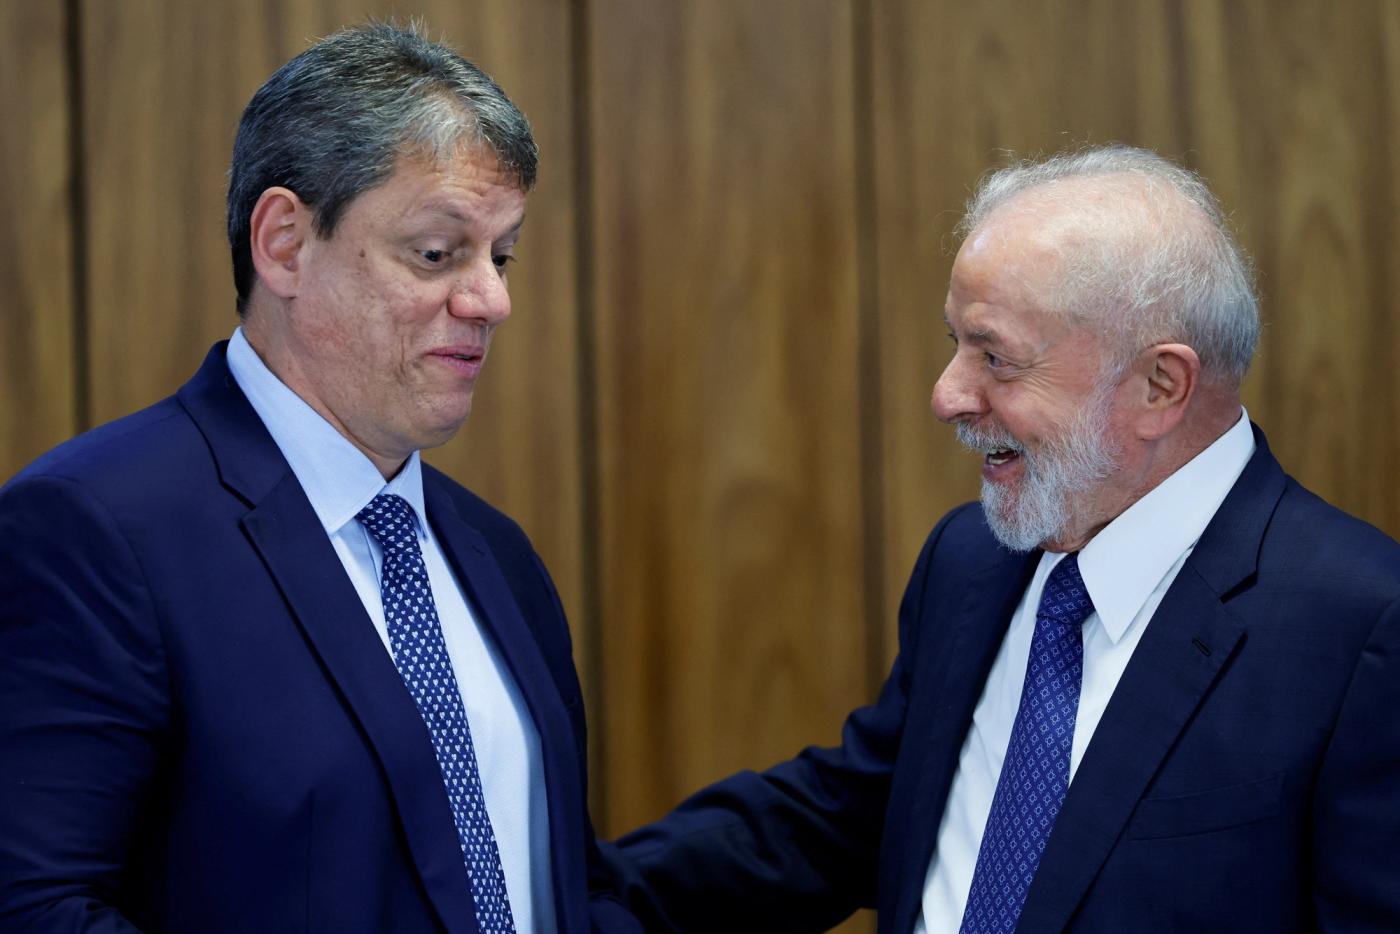 Brazil's president Luiz Inacio Lula da Silva talks with Sao Paulo's Governor Tarcisio de Freitas during a ceremony announcing investments by public banks in States, at the Planalto Palace in Brasilia, Brazil, December 12, 2023.